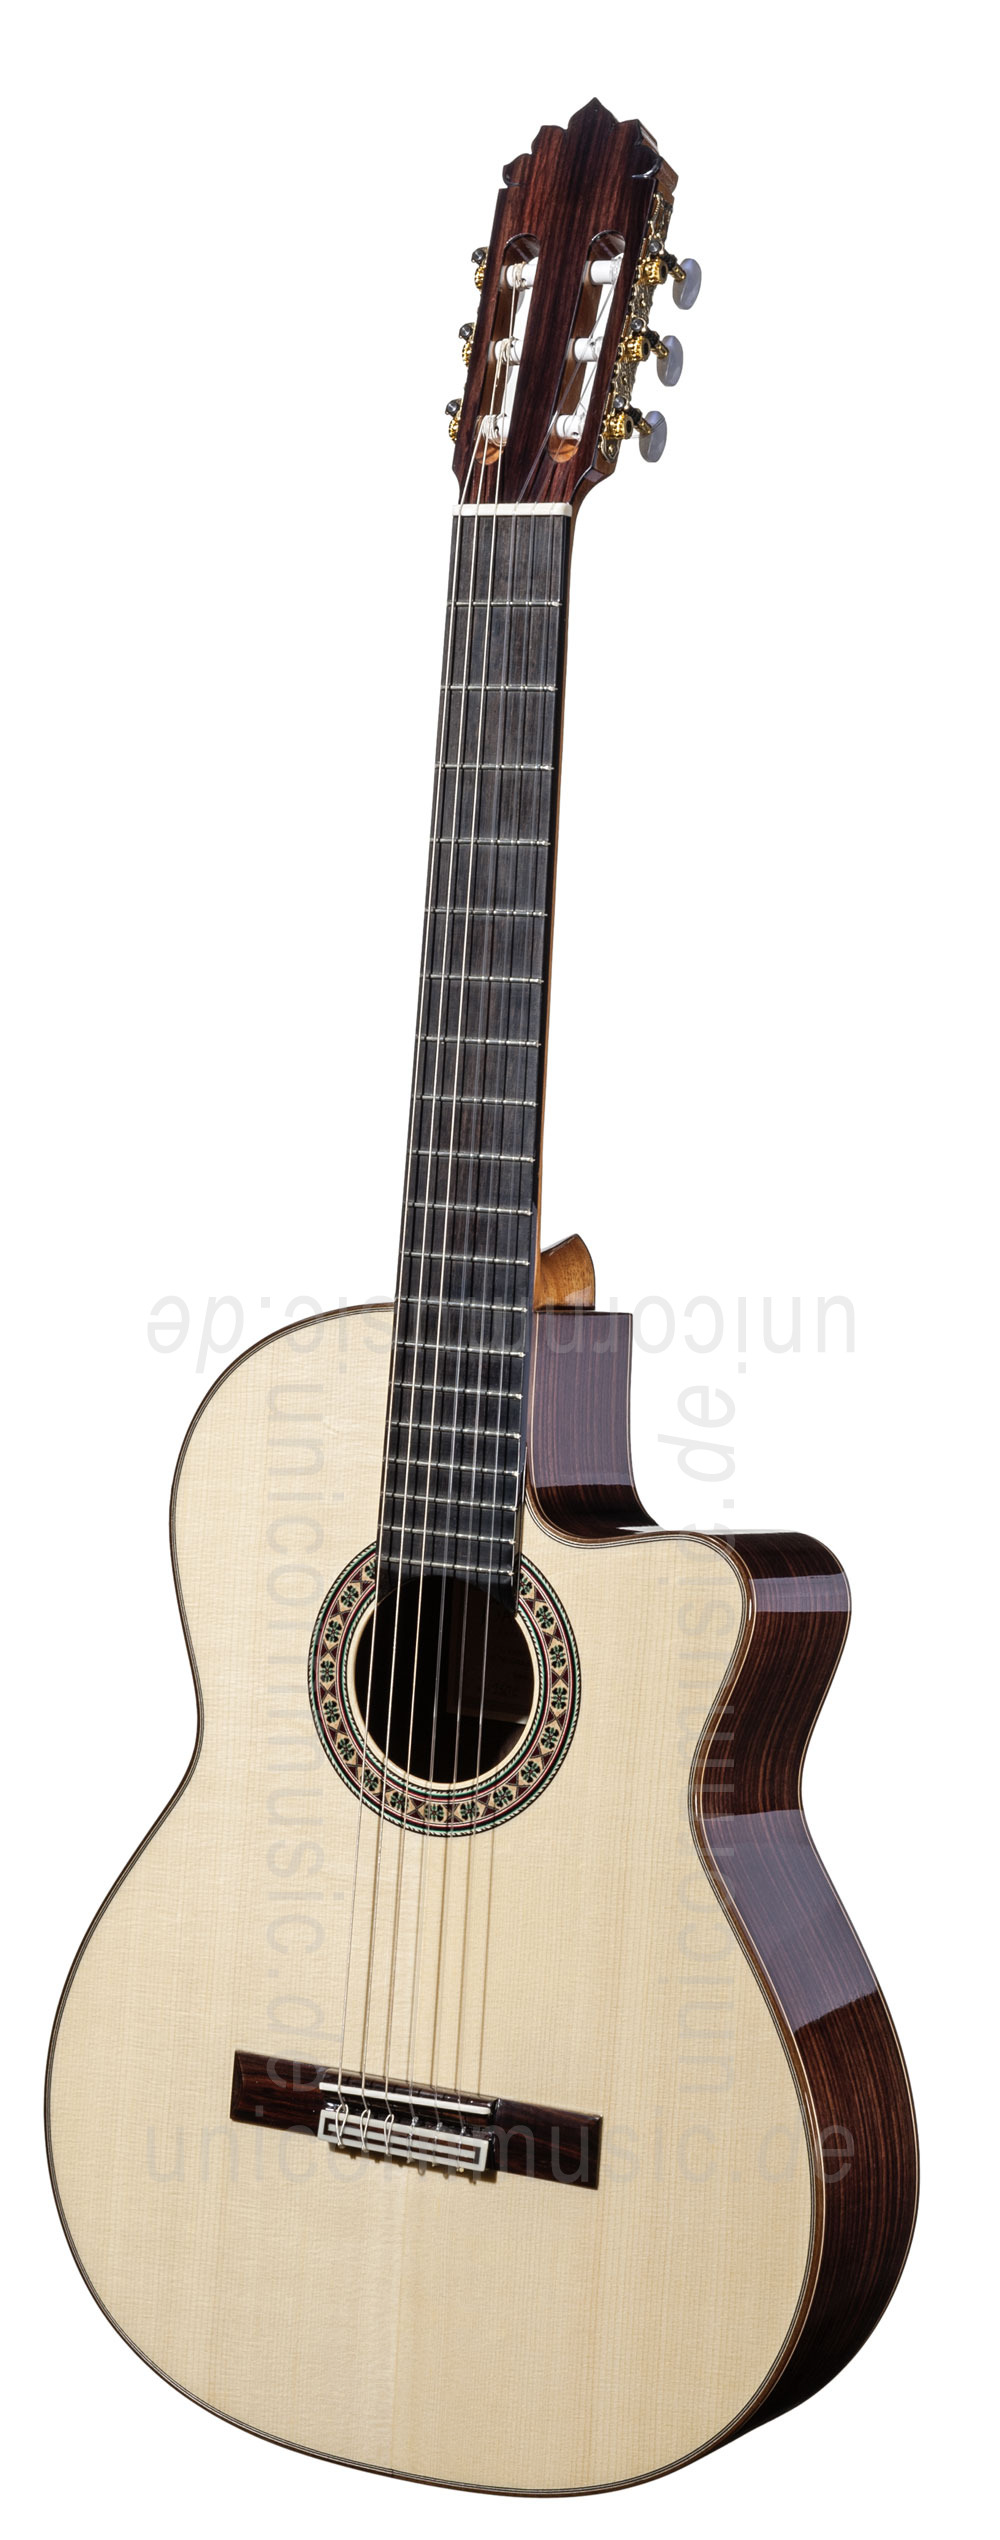 to article description / price Spanish Classical Guitar JOAN CASHIMIRA MODEL 130 Cutaway Spruce - without pickup - solid spruce top